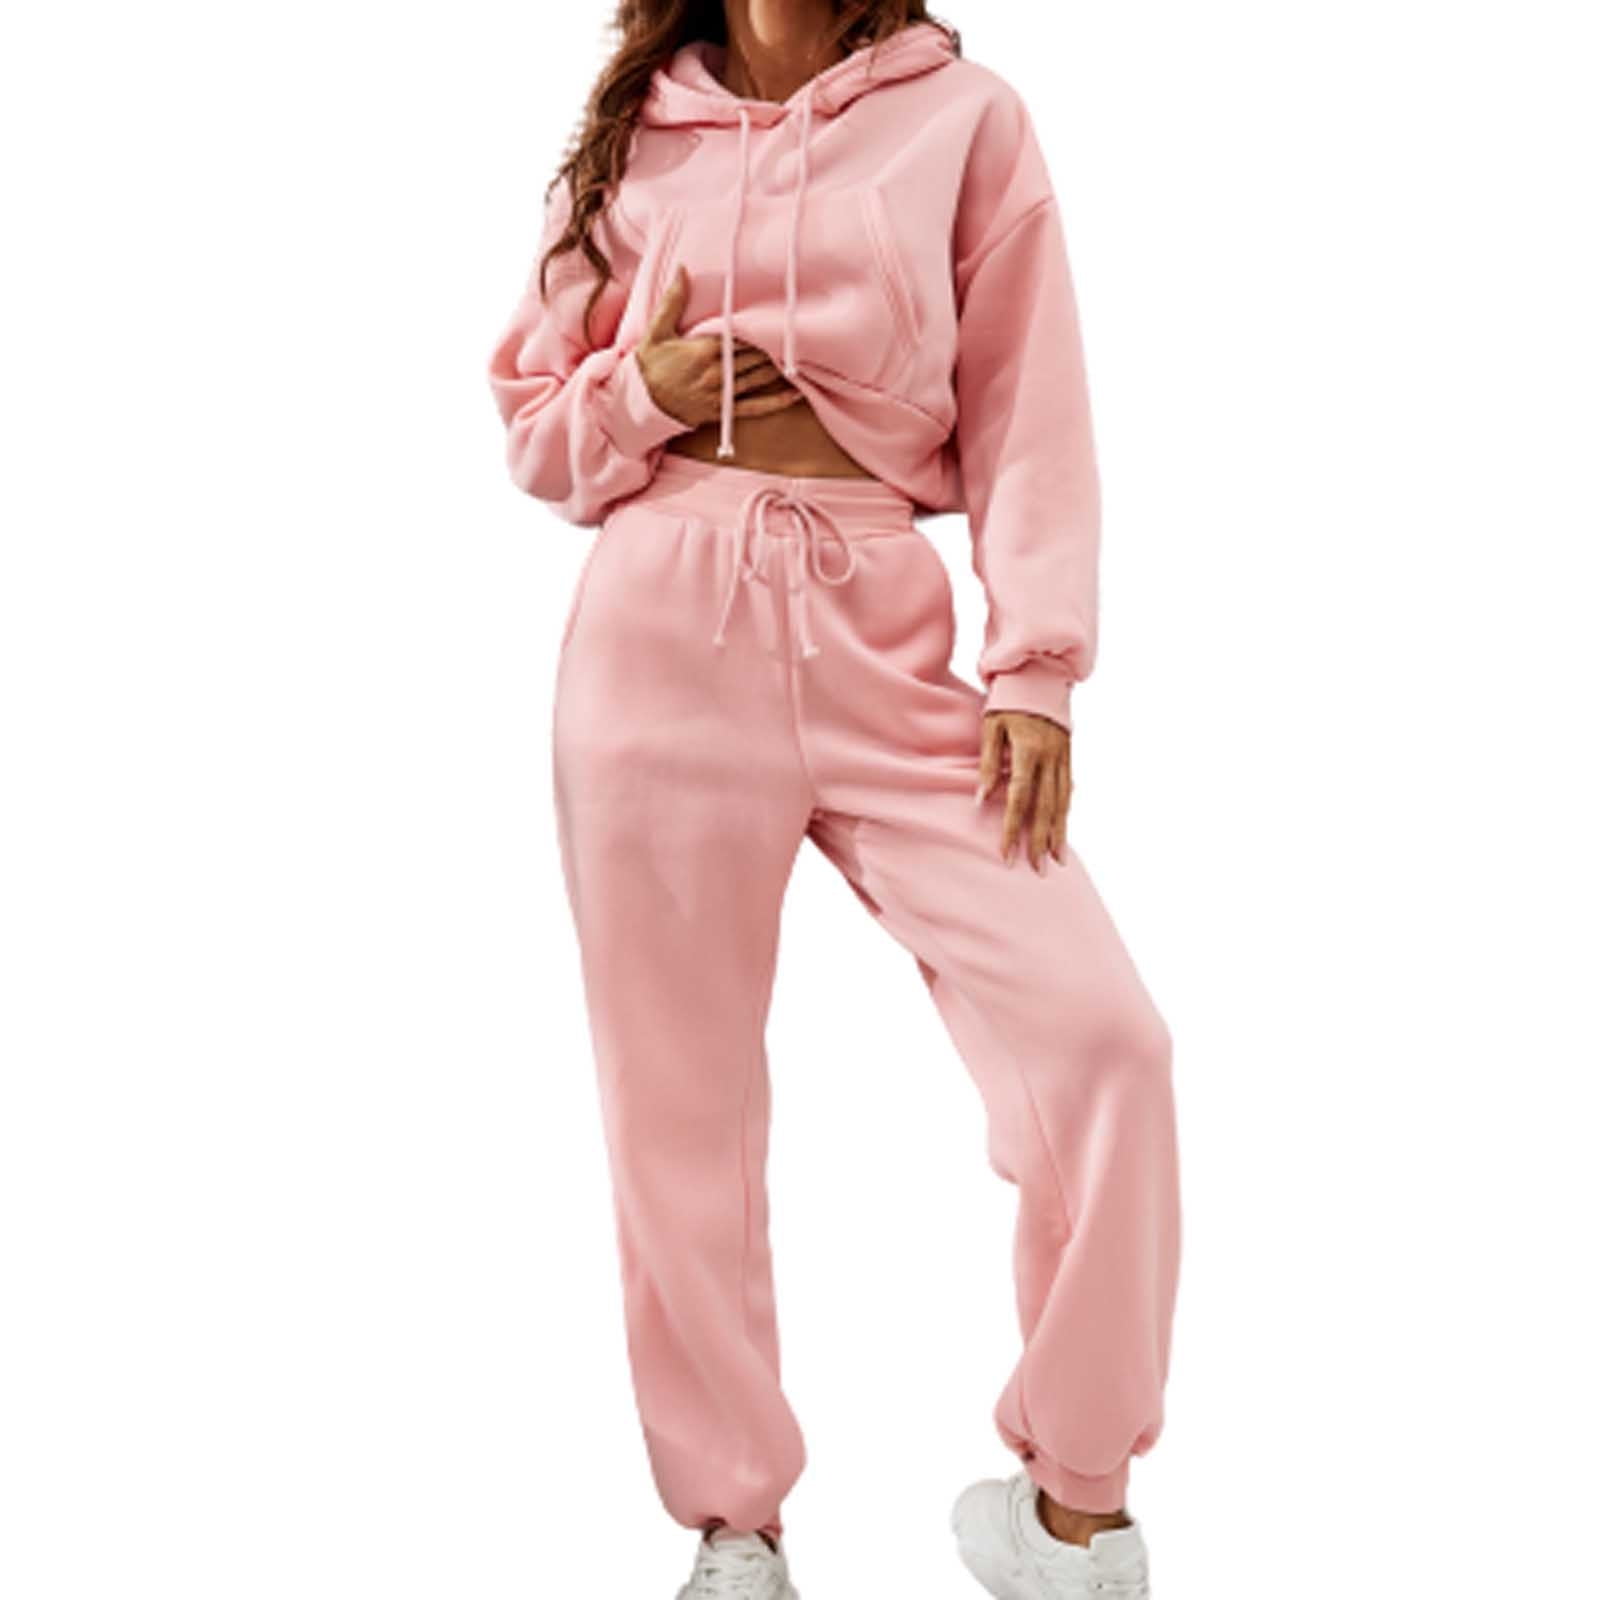 Jalioing Hooded Tracksuit Sets for Women Drawstring Short